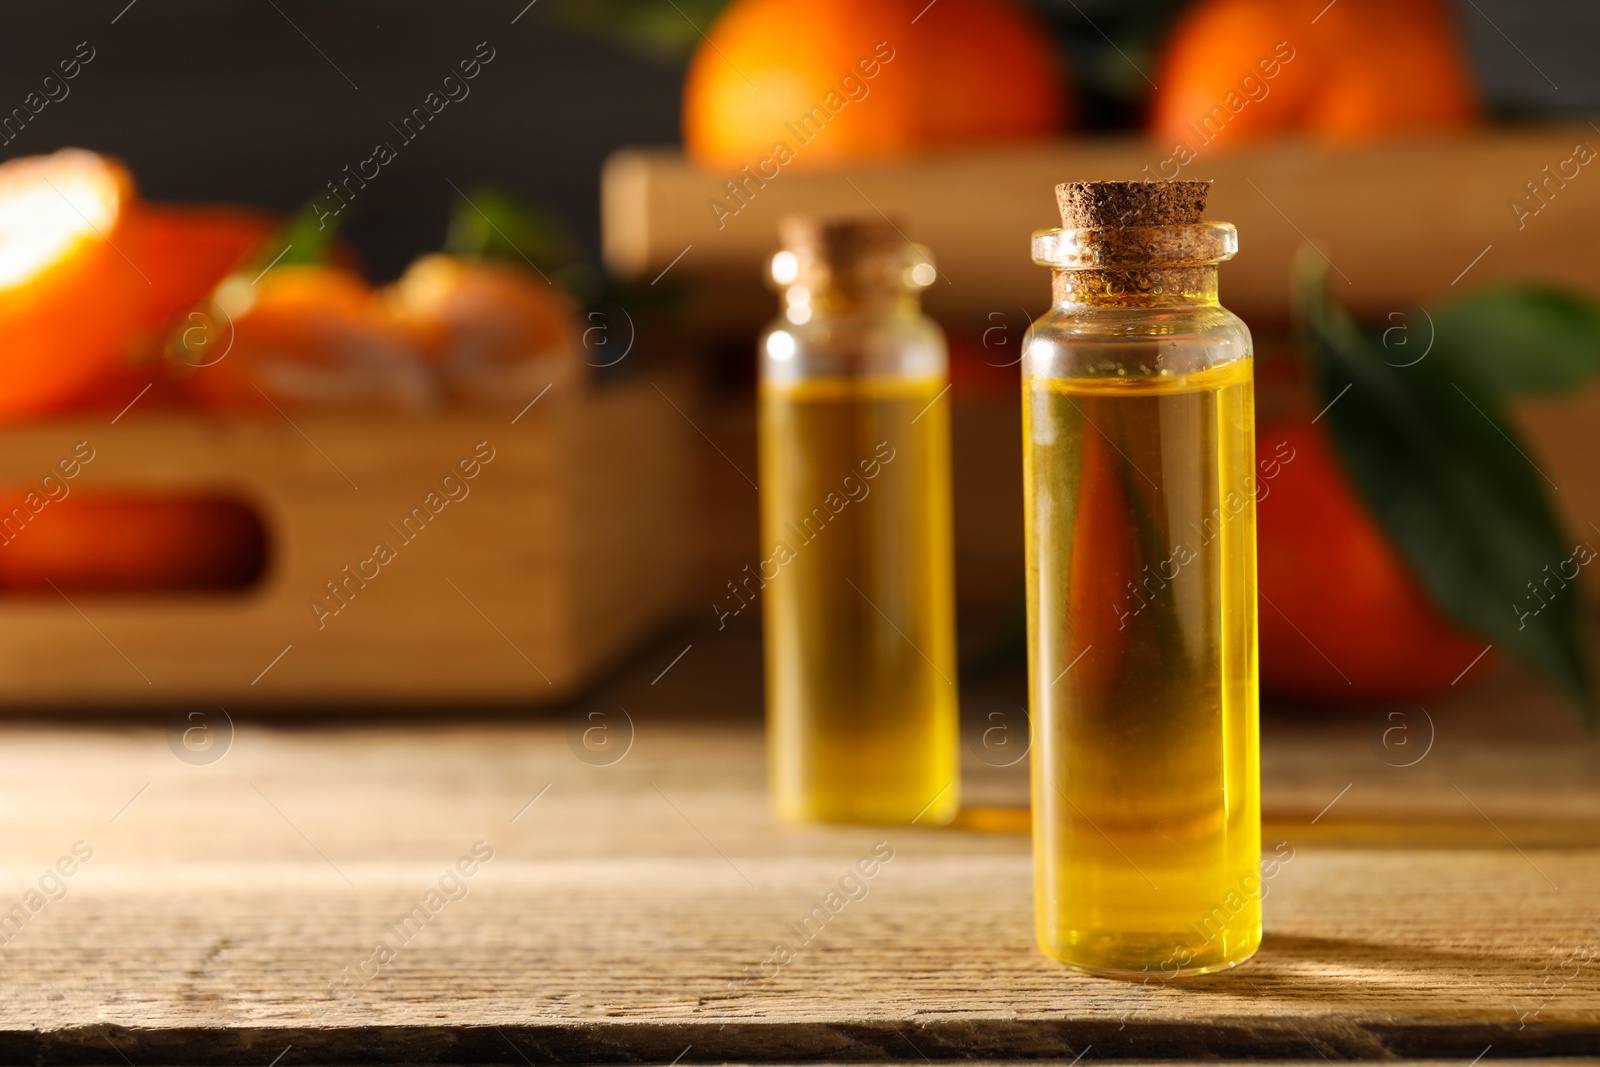 Photo of Bottles of tangerine essential oil on wooden table, closeup